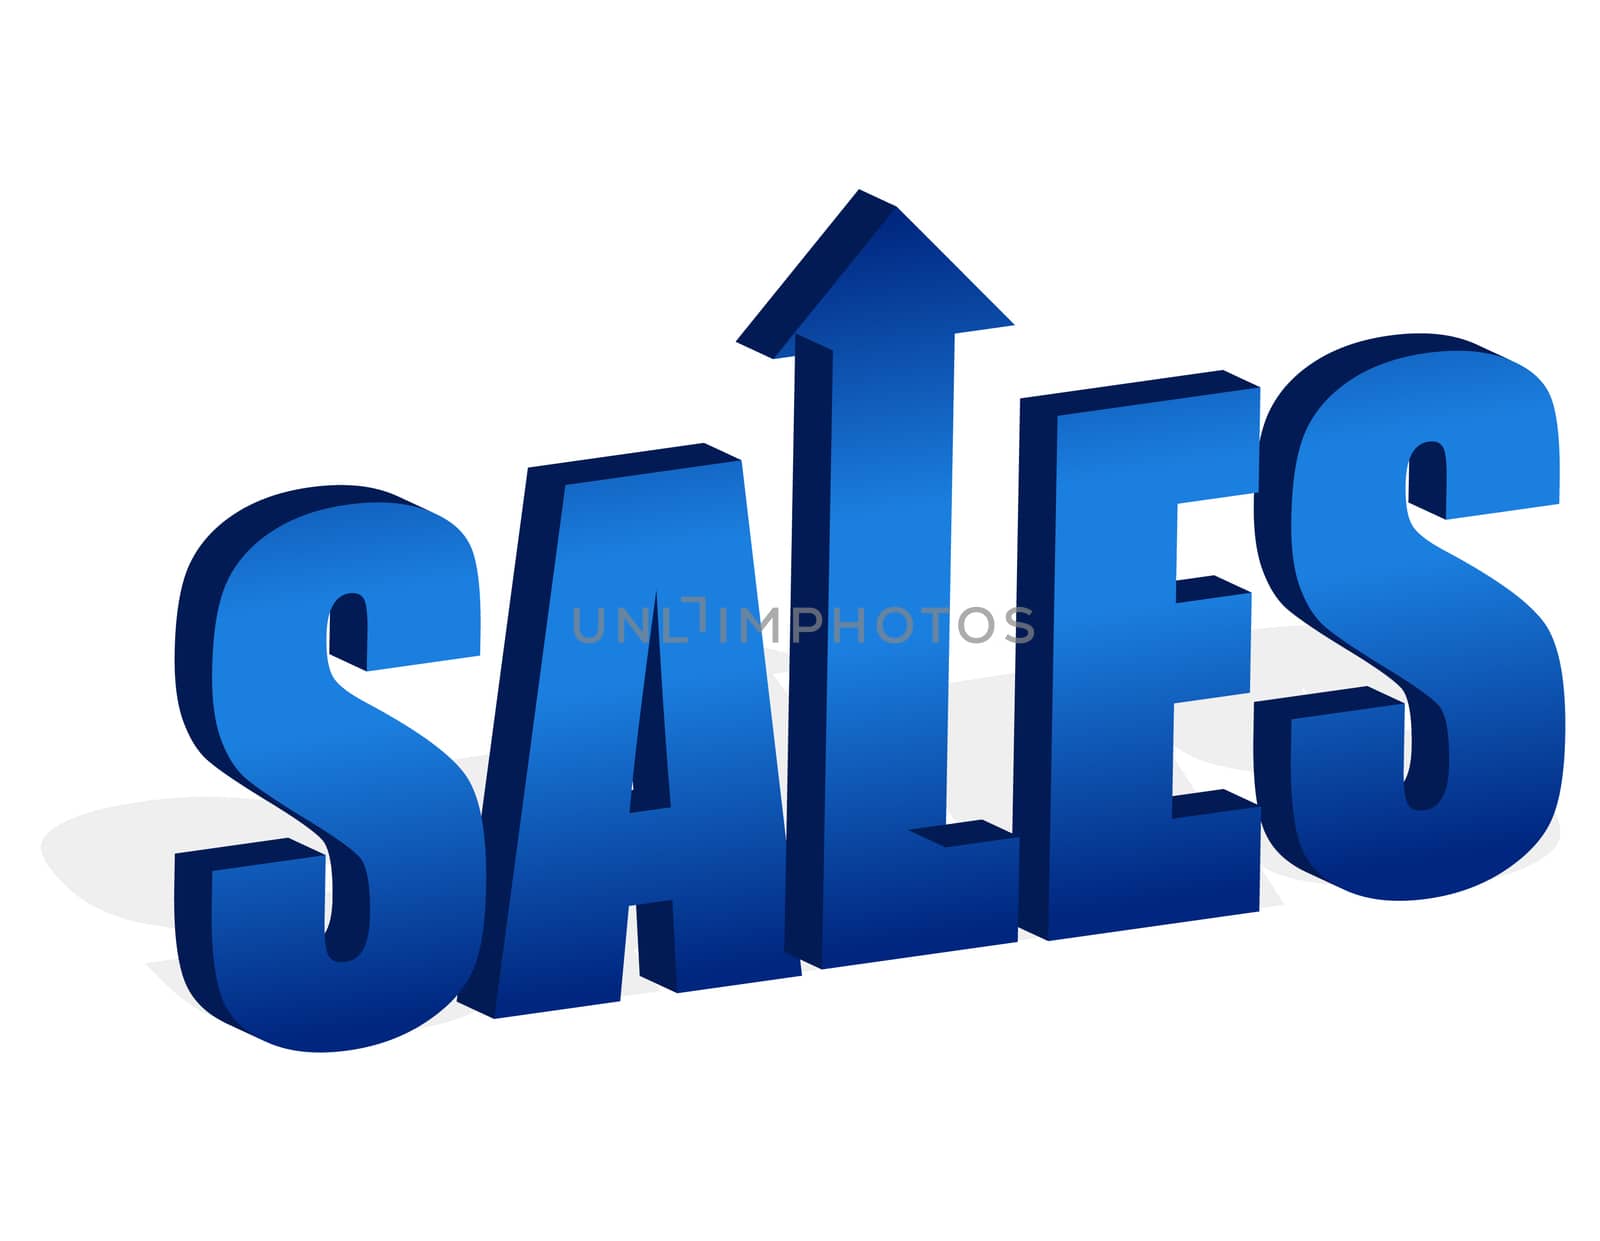 Sales up improvement illustration isolated over a white background.